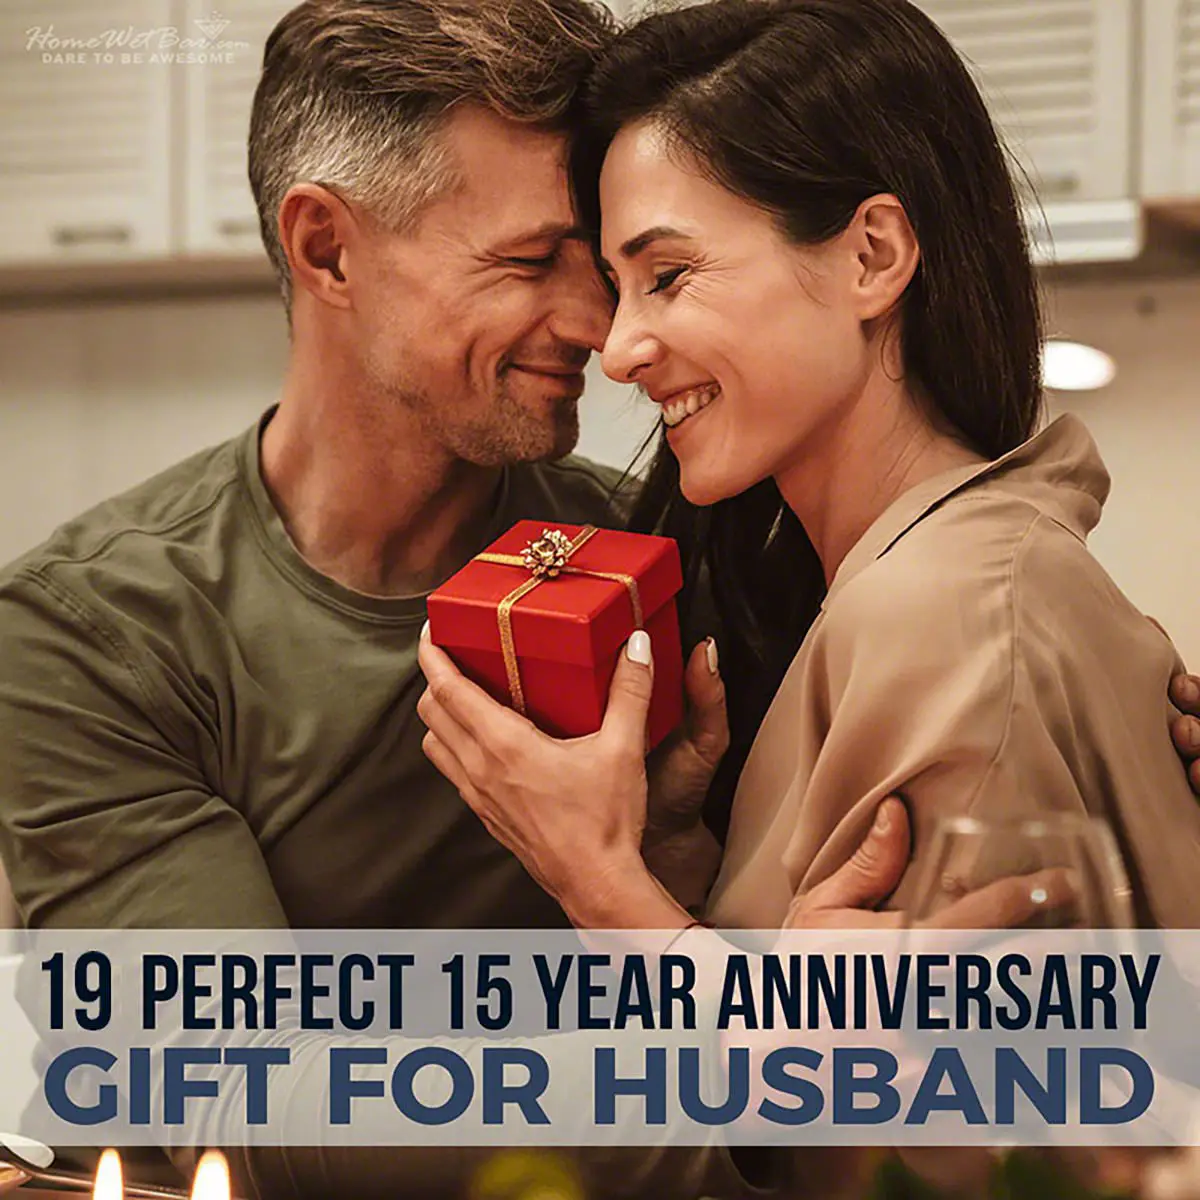 23 Romantic Anniversary Ideas for Husband-sonthuy.vn